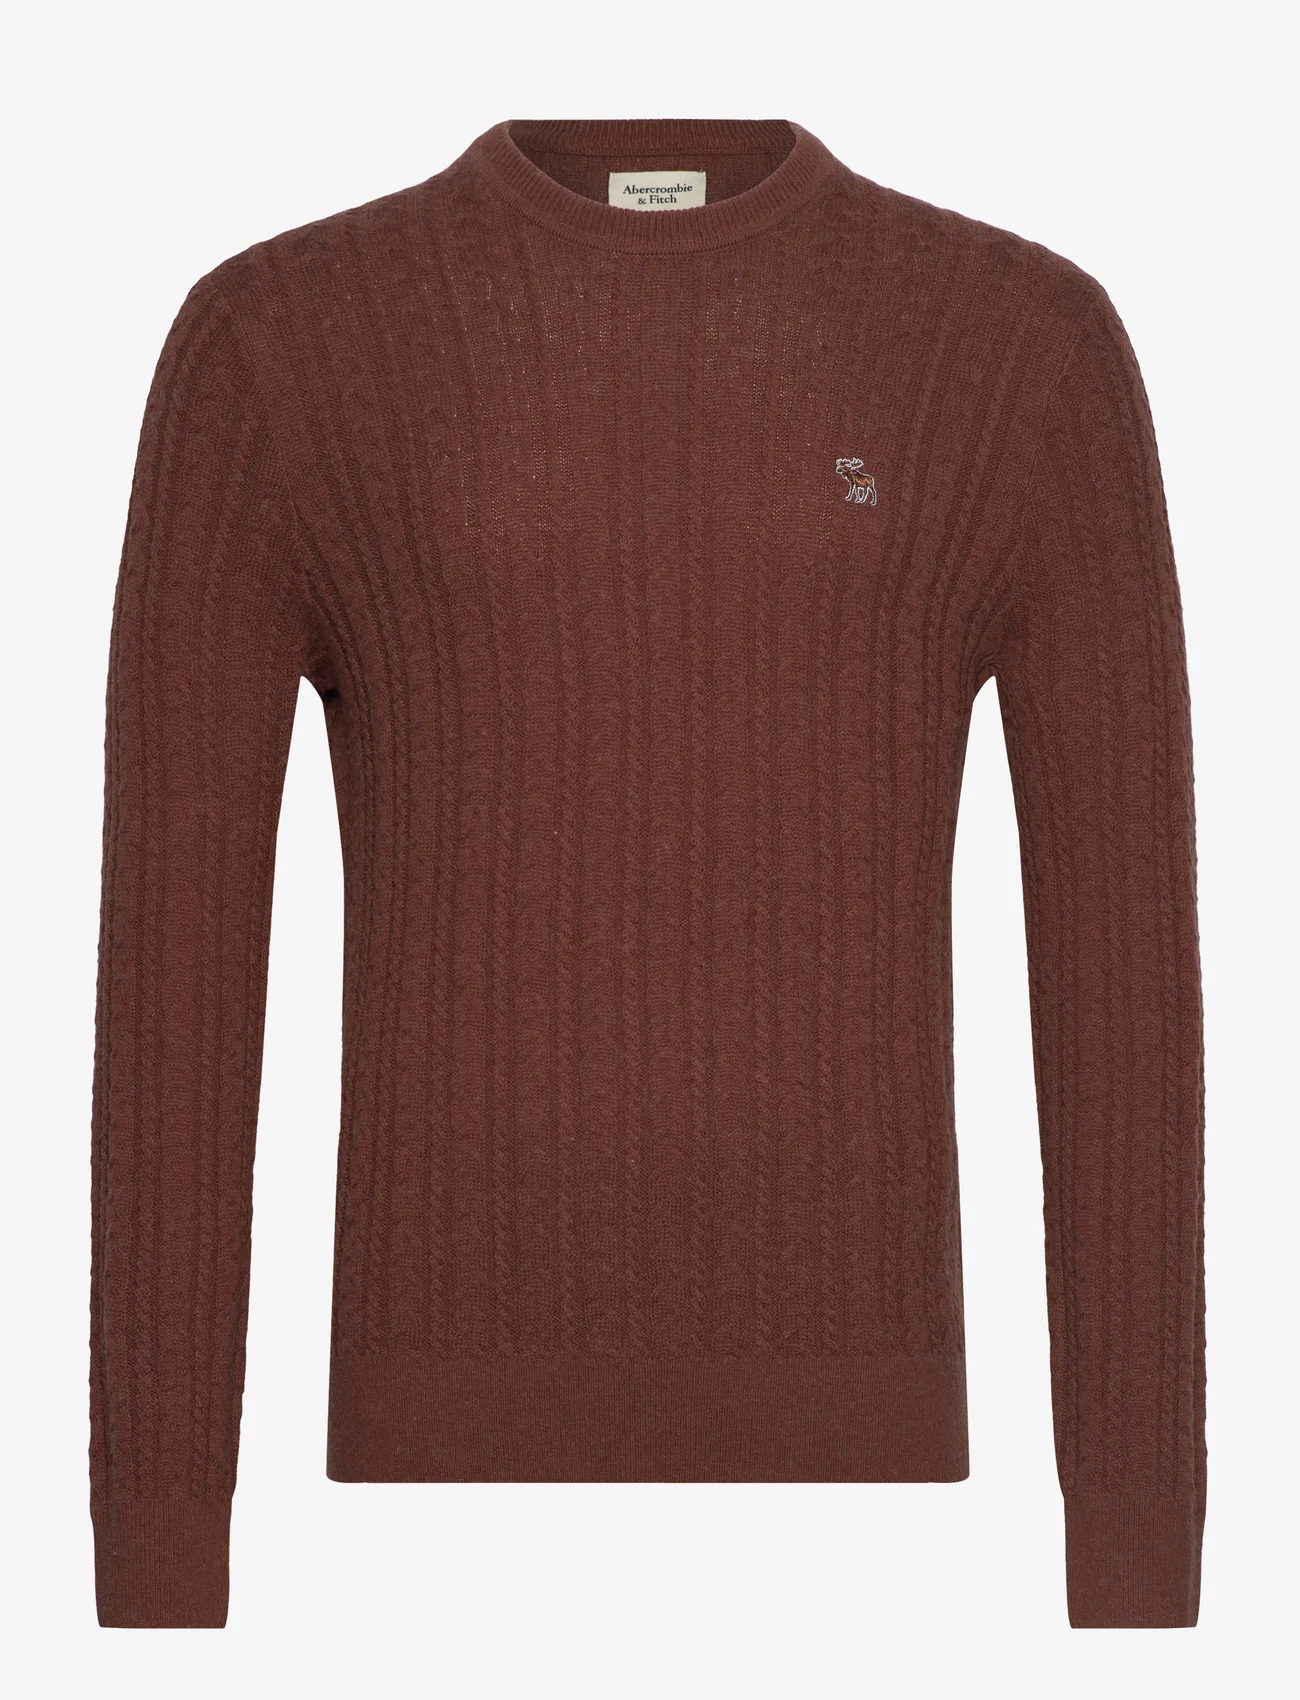 Abercrombie & Fitch - ANF MENS SWEATERS - knitted round necks - friar brown - 0